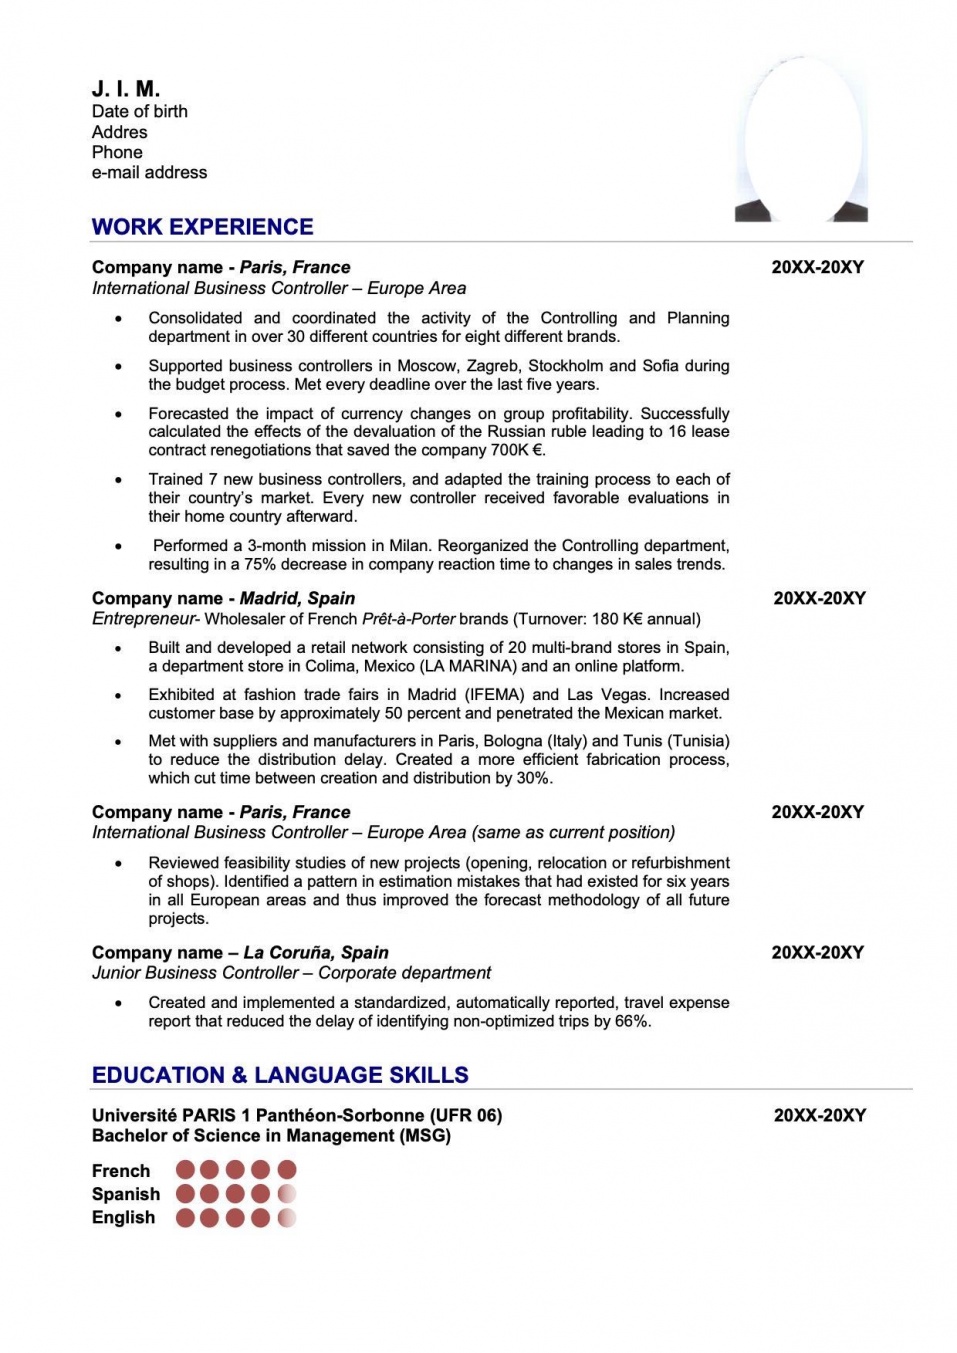 Example of a good CV for an MBA application